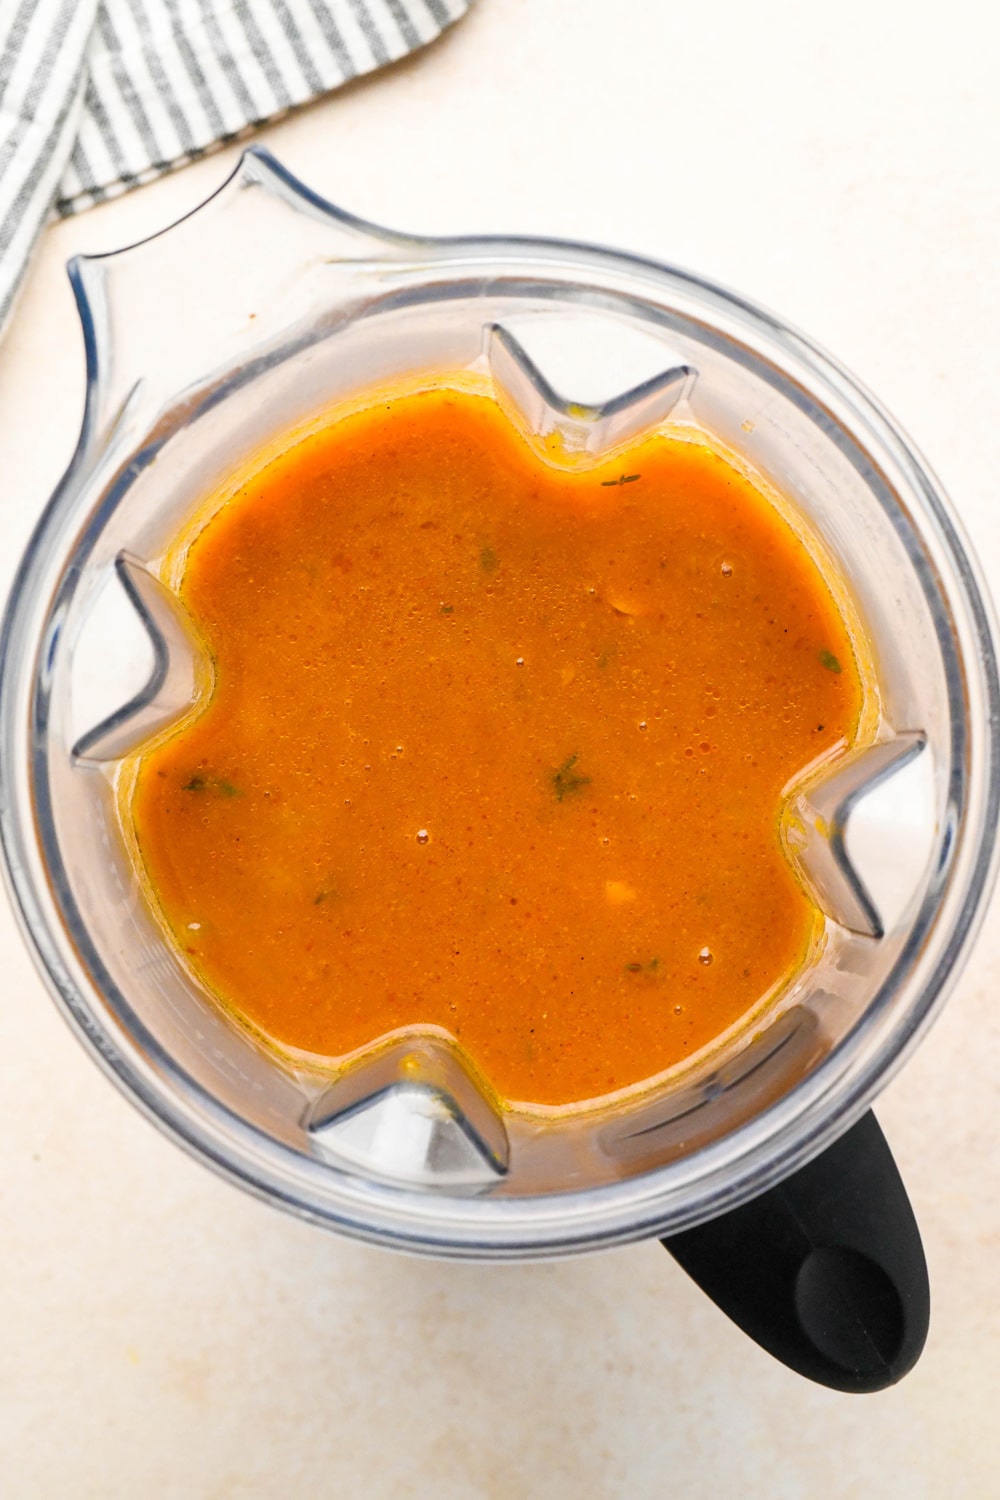 How to make Dairy Free Pumpkin Carrot Soup: Soup in the blender before blending.